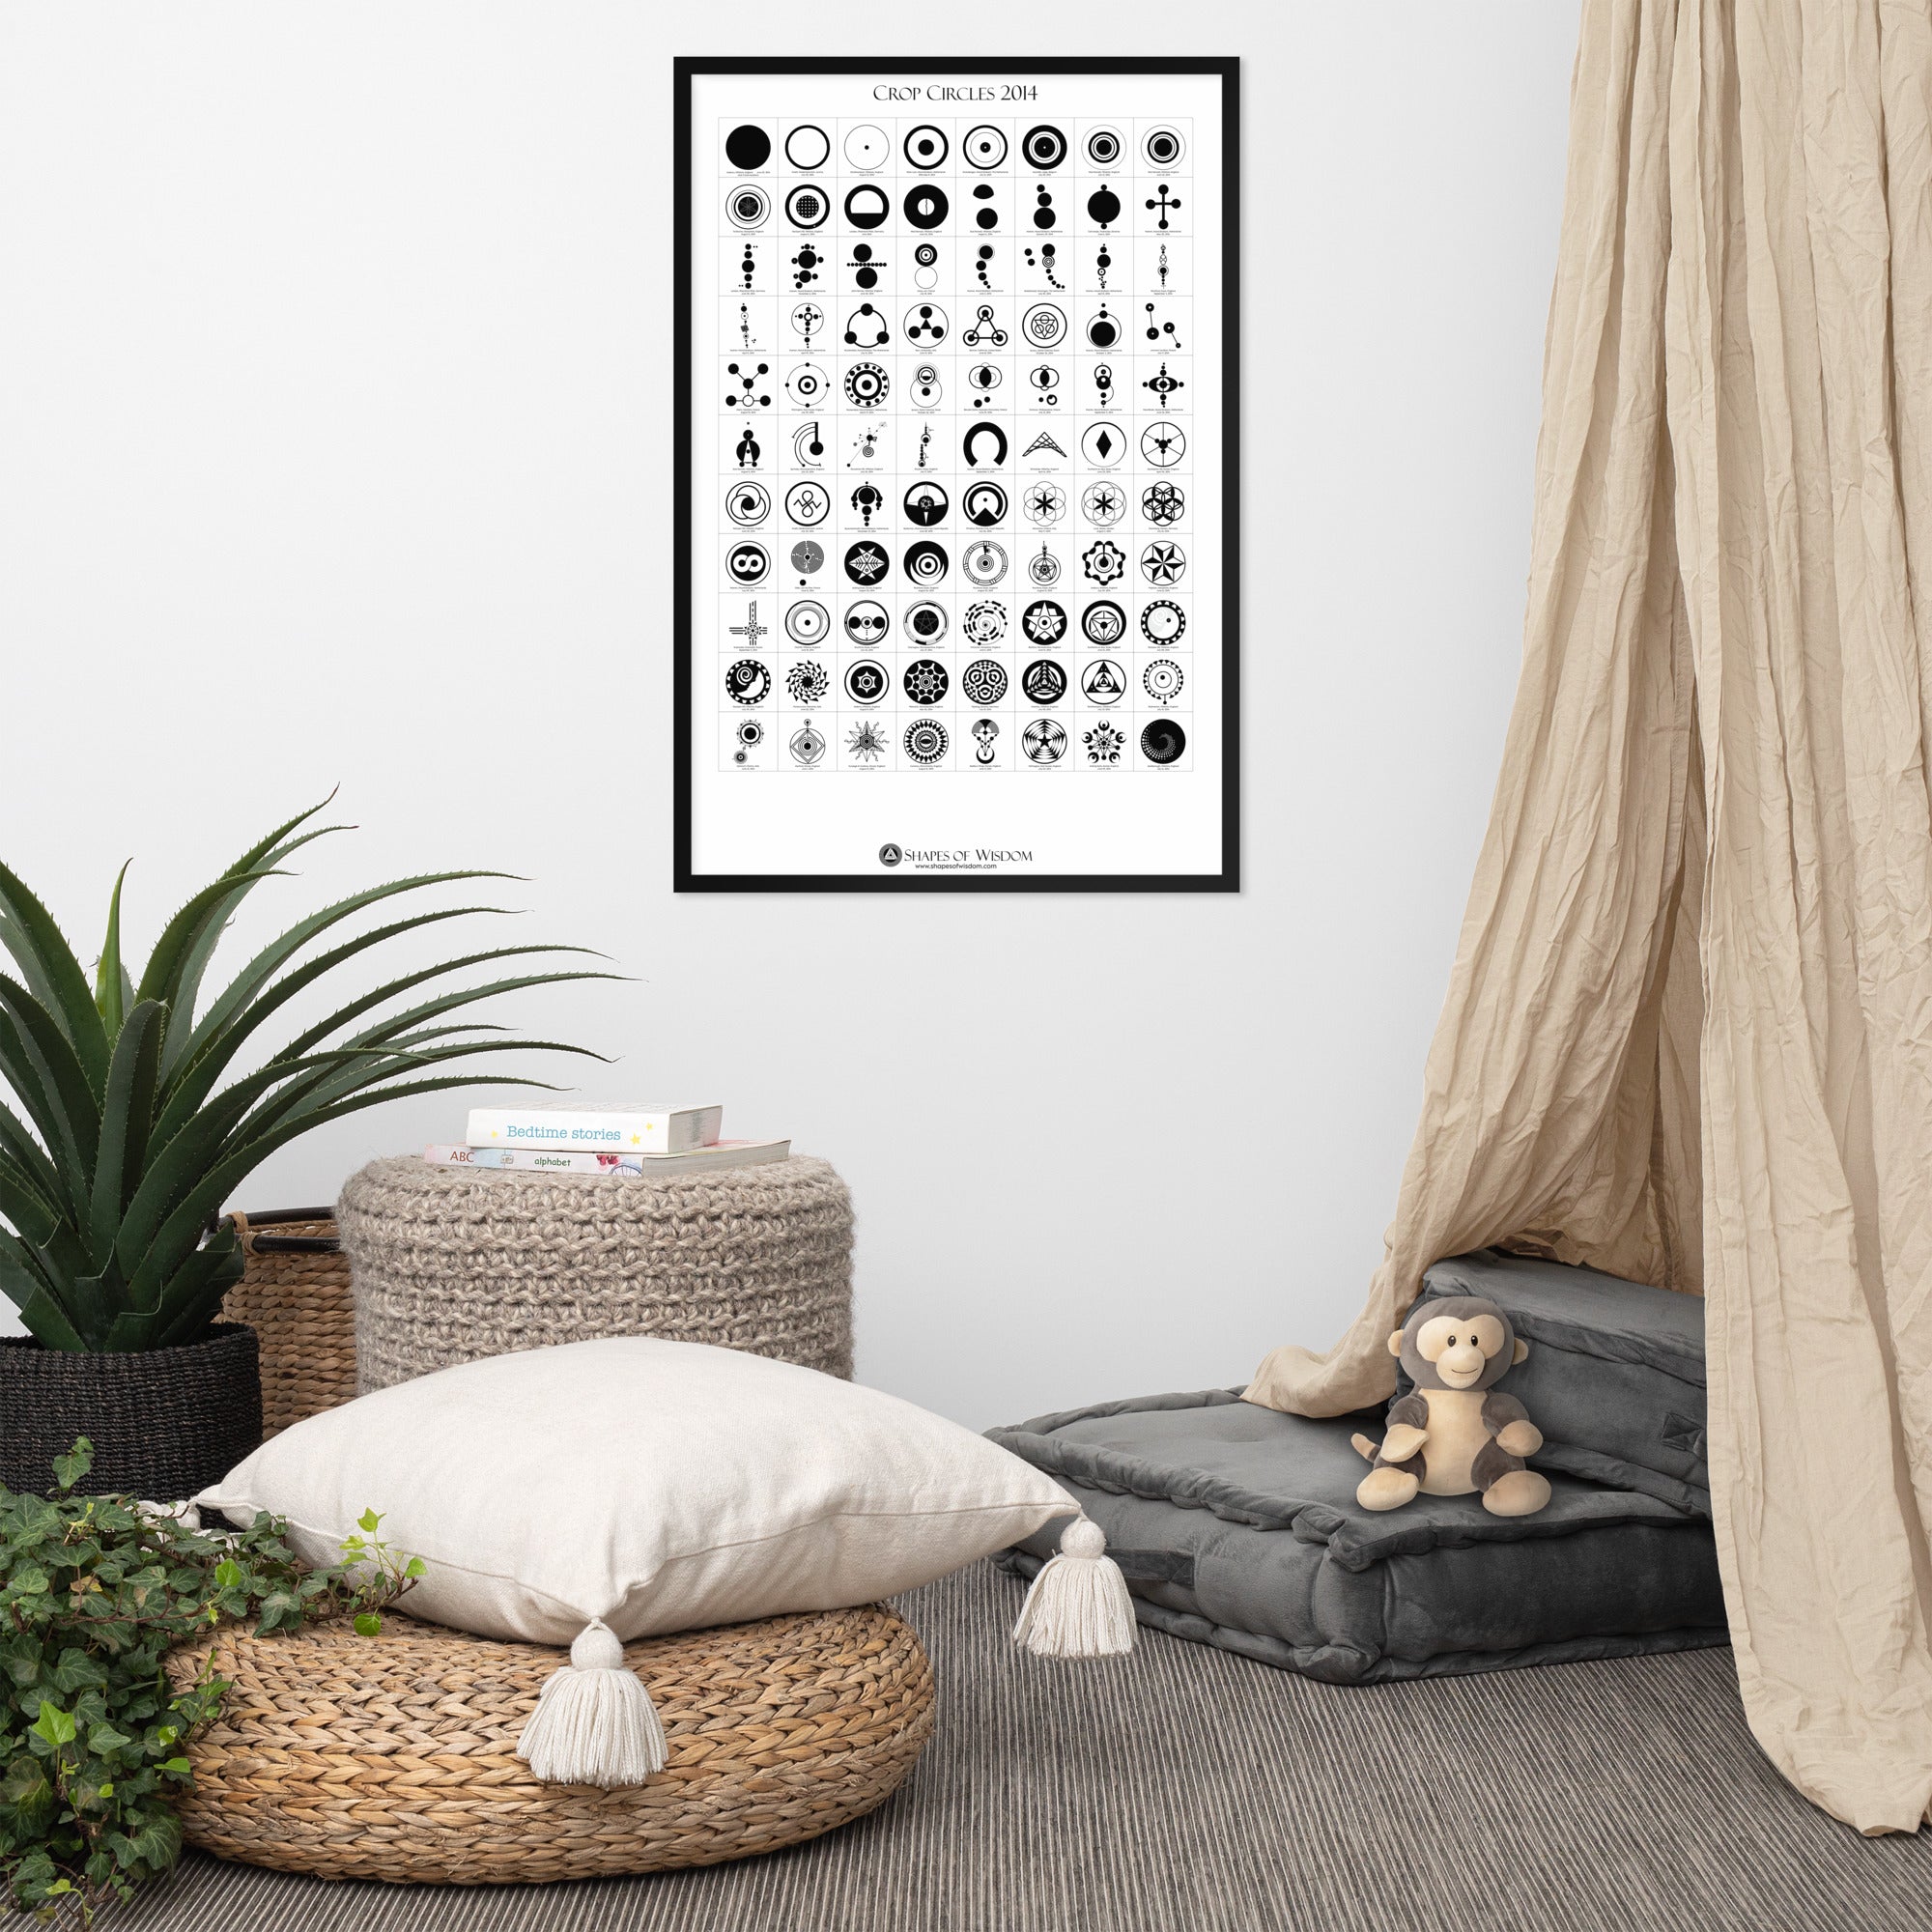 Crop Circles 2014 Framed Poster - Shapes of Wisdom